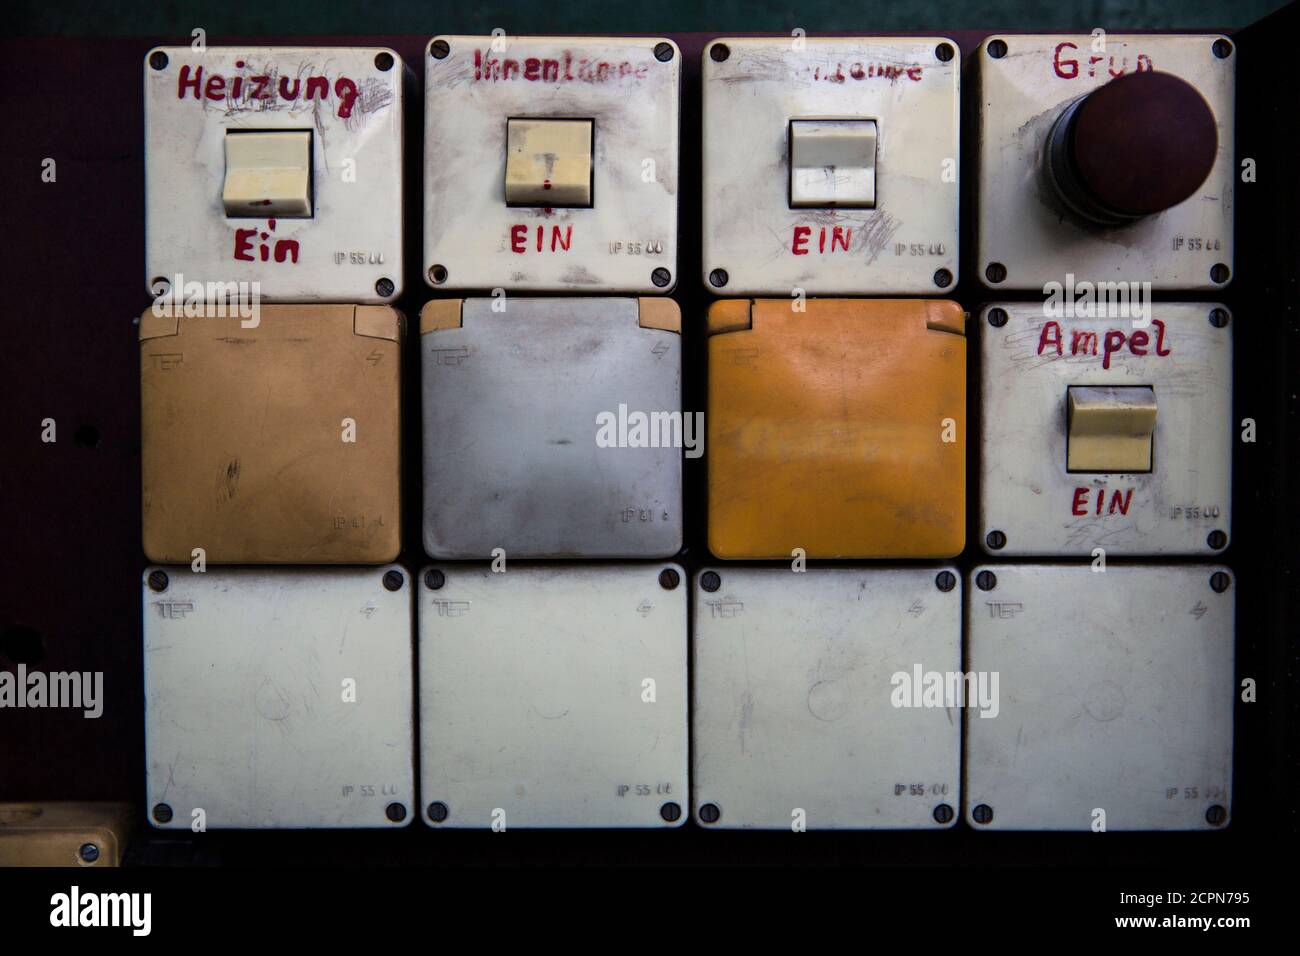 A picture shows a panel of switches inside Christoph Zwiener's exhibition project 'ADN Guard House' in Berlin May 22, 2014. A German artist has turned a tiny surveillance booth used by the communist regime in the former East Germany to monitor citizens into an art exhibit and venue, which will be installed in a museum near Los Angeles dedicated to the Cold War. The one-person guardhouse measuring 2 m by 1 m (2 yards by 1 yard) was originally located in the parking lot of state-run news agency ADN so that authorities could keep a watchful eye on reporters. Artist Christof Zwiener rescued it fro Stock Photo